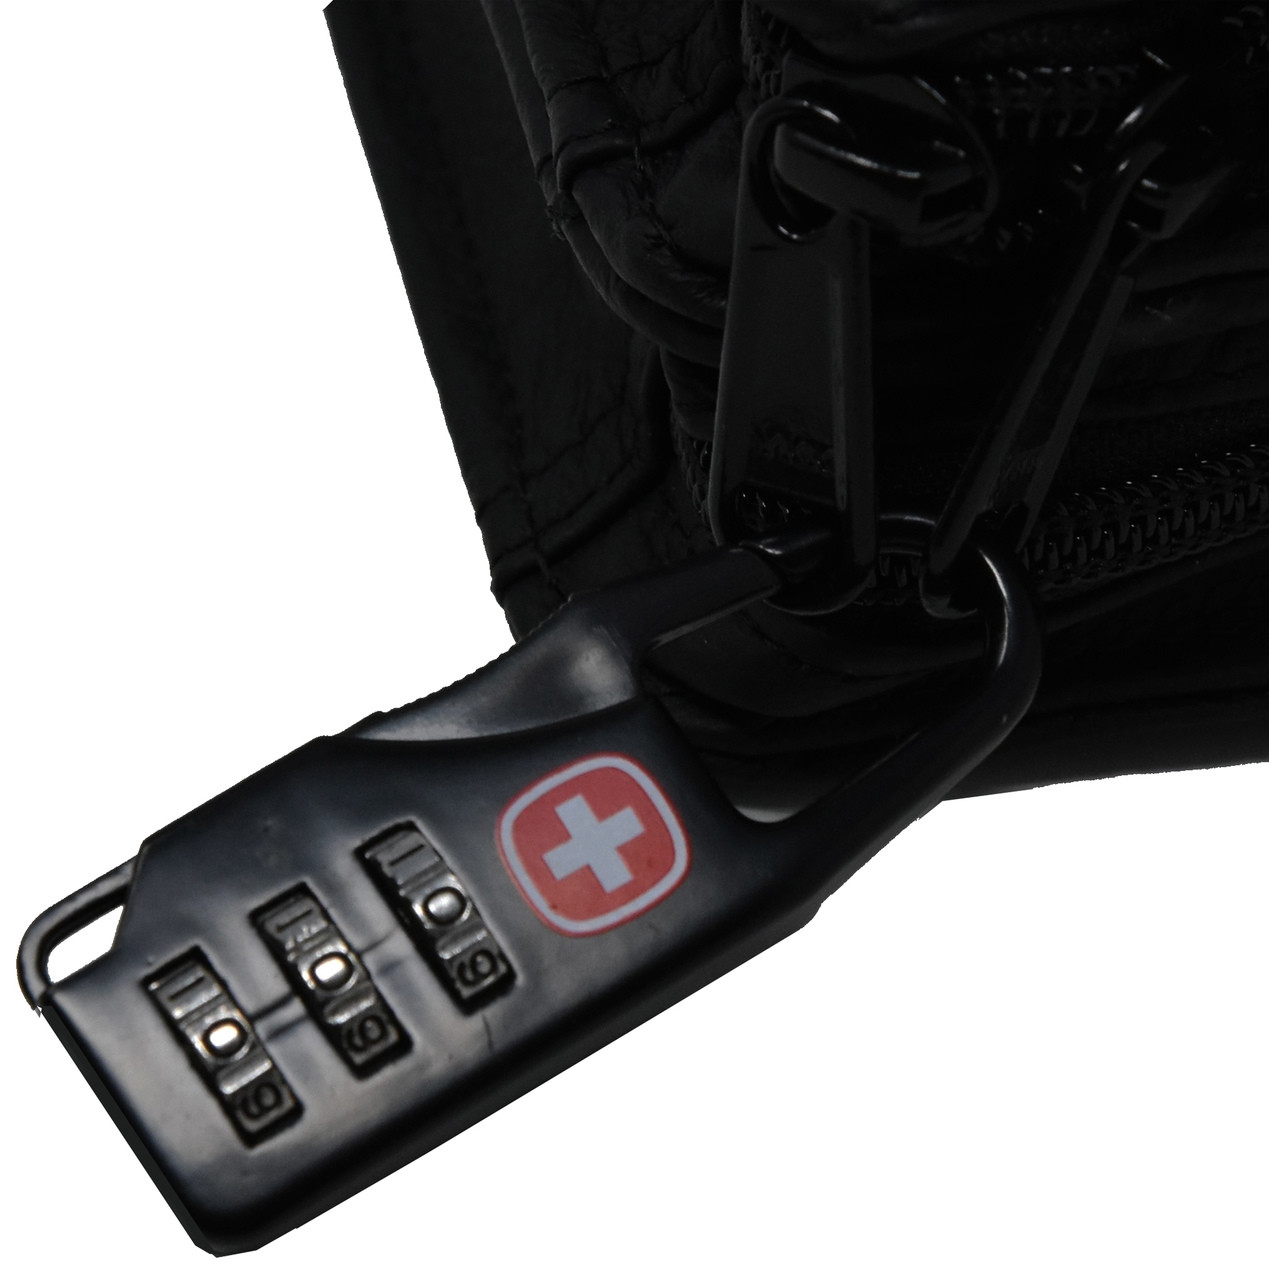 Swiss Army Combination Carabiner Style Lock For Tactical Gear and Travel Luggage